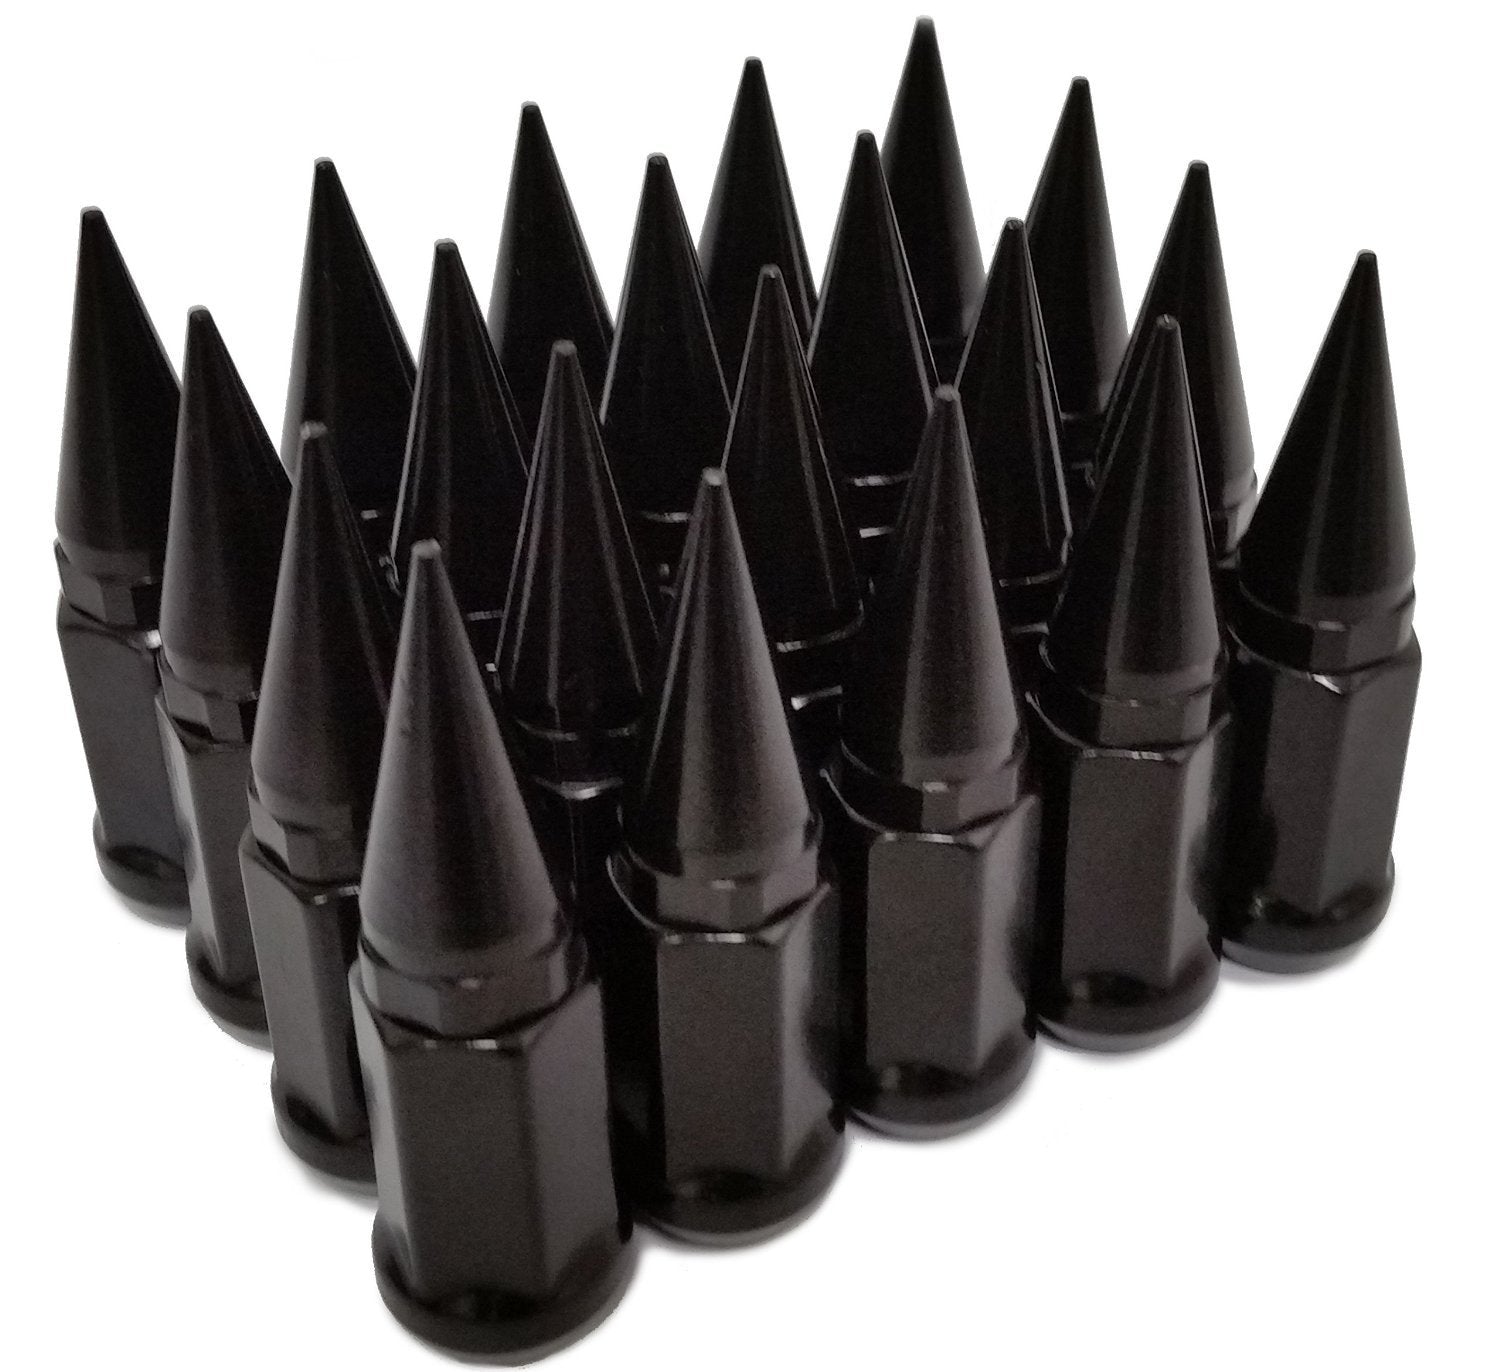 20 BLACK/BLACK SPIKED EXTENDED 50MM LUG NUTS FOR WHEEL 12X1.5 - Wheel Adapters USA - 2